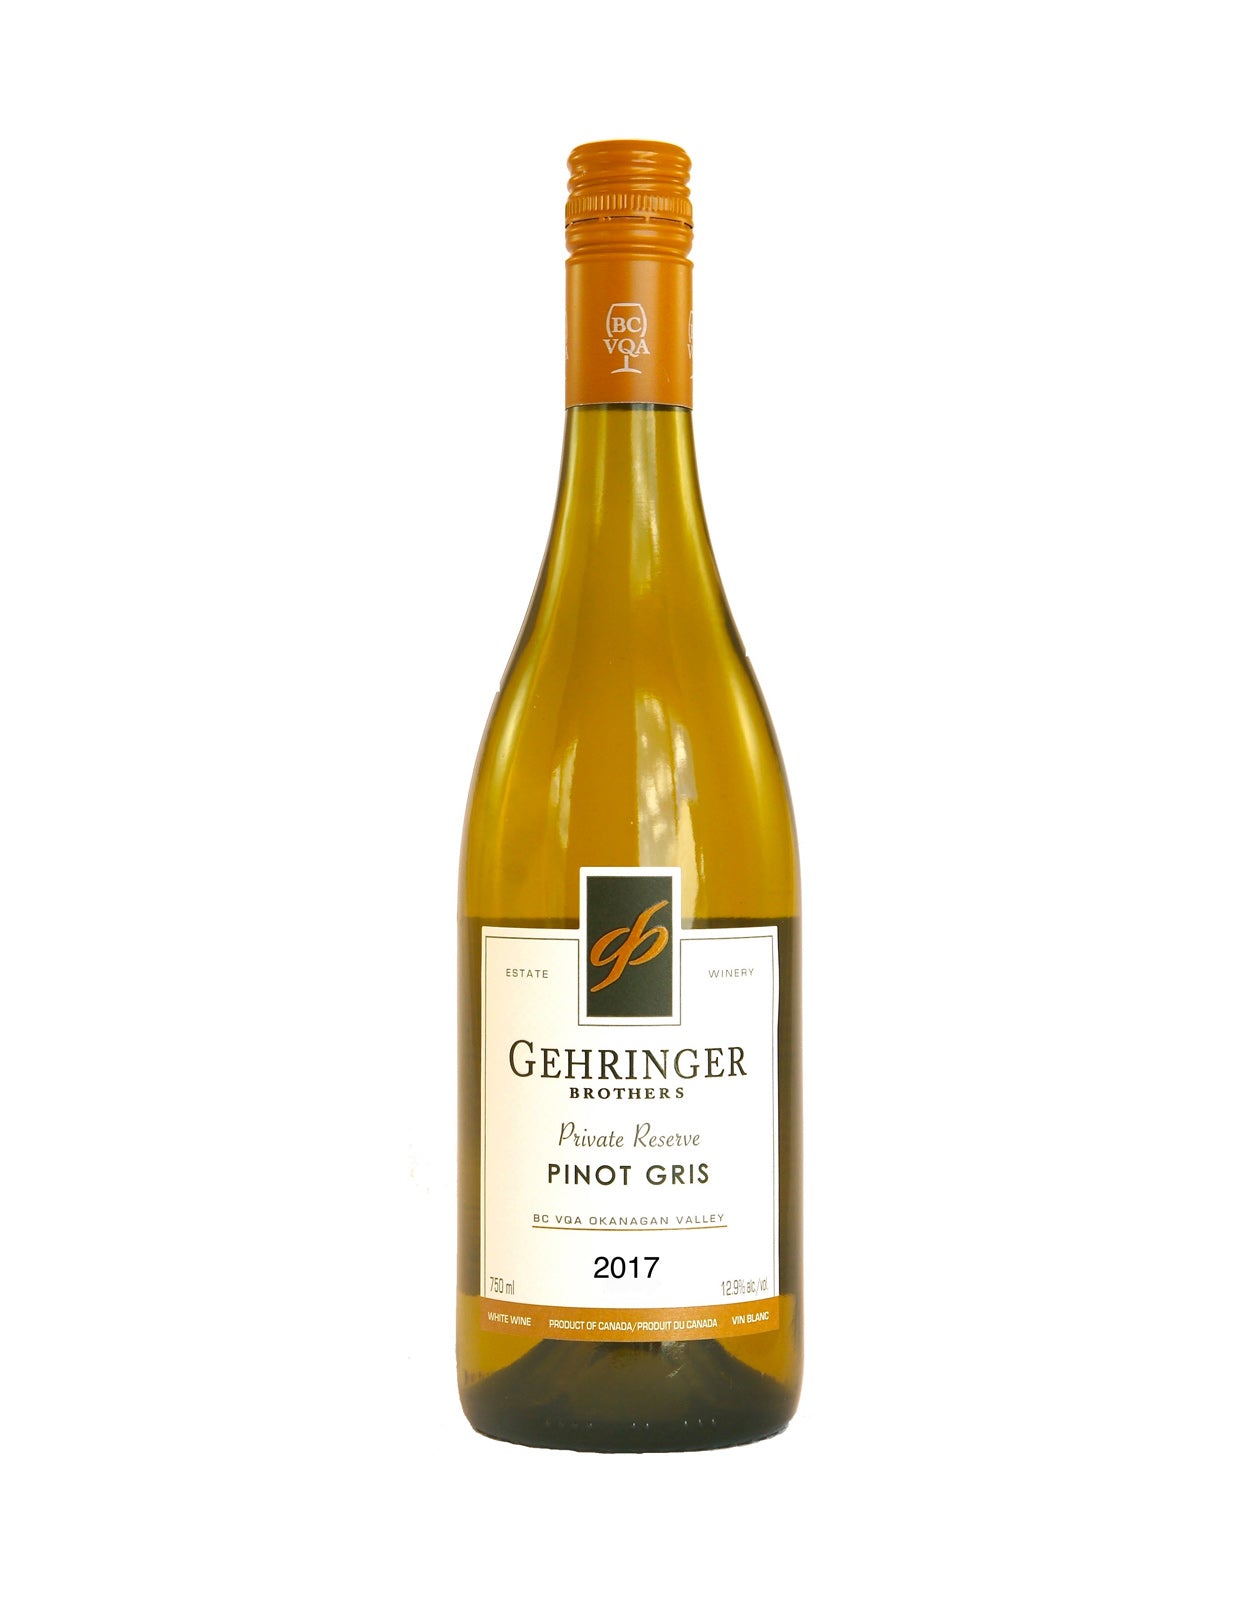 Gehringer Brothers Pinot Gris 2021